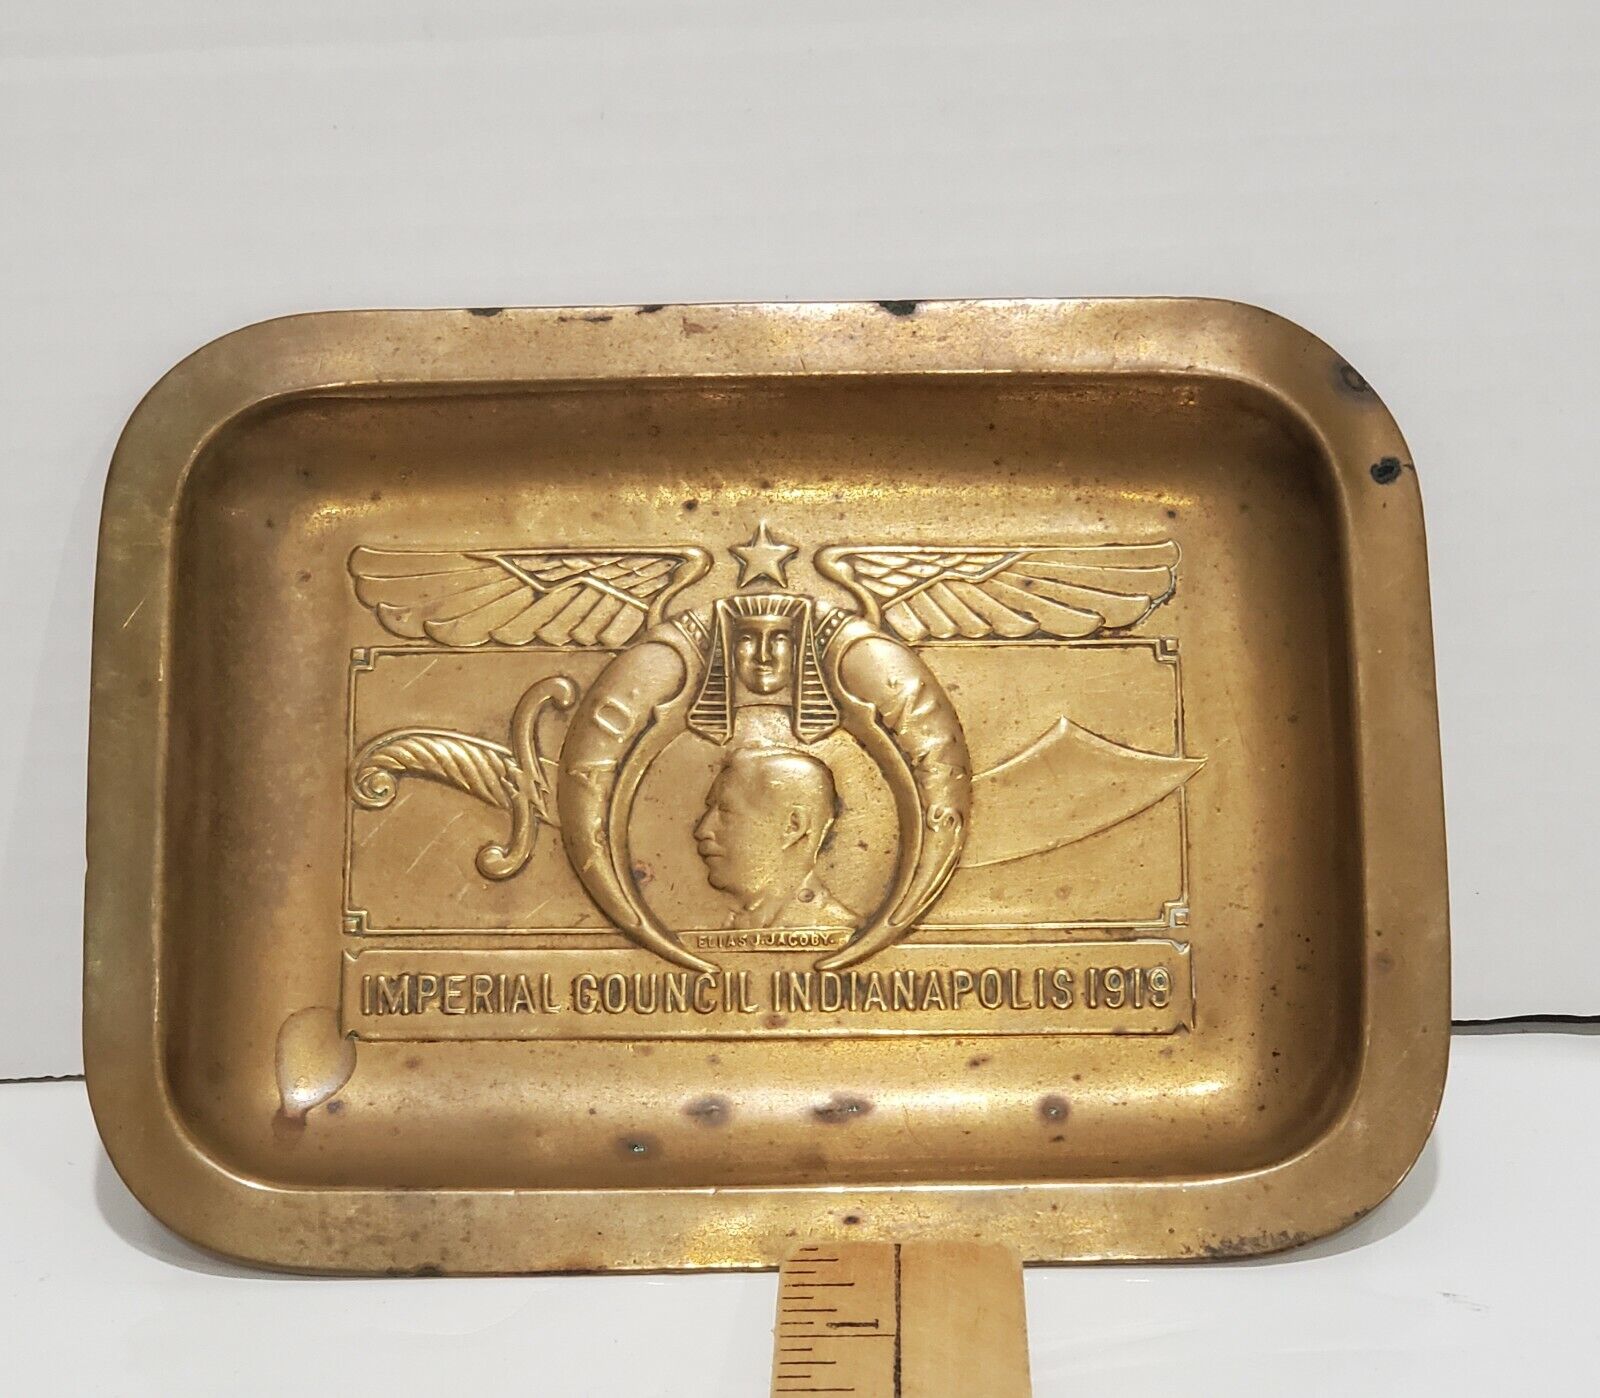 Shriner Brass Bonze Imperial Council Indianapolis 1919 Tray - Whitehead & Hoag